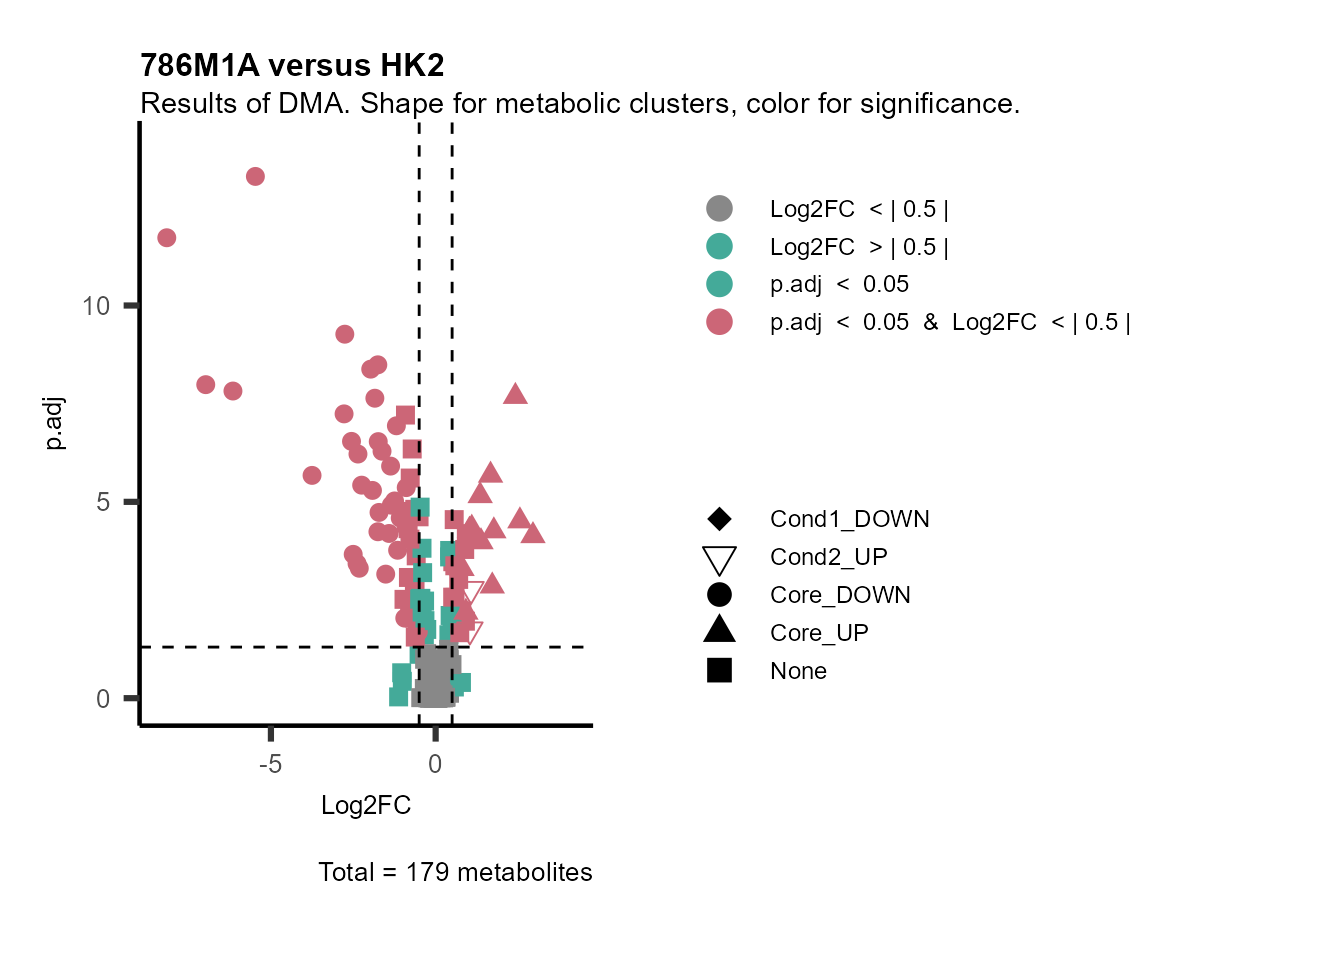 Figure: Standard figure displaying DMA results colour coded/shaped for metabolic clusters from MCA results.